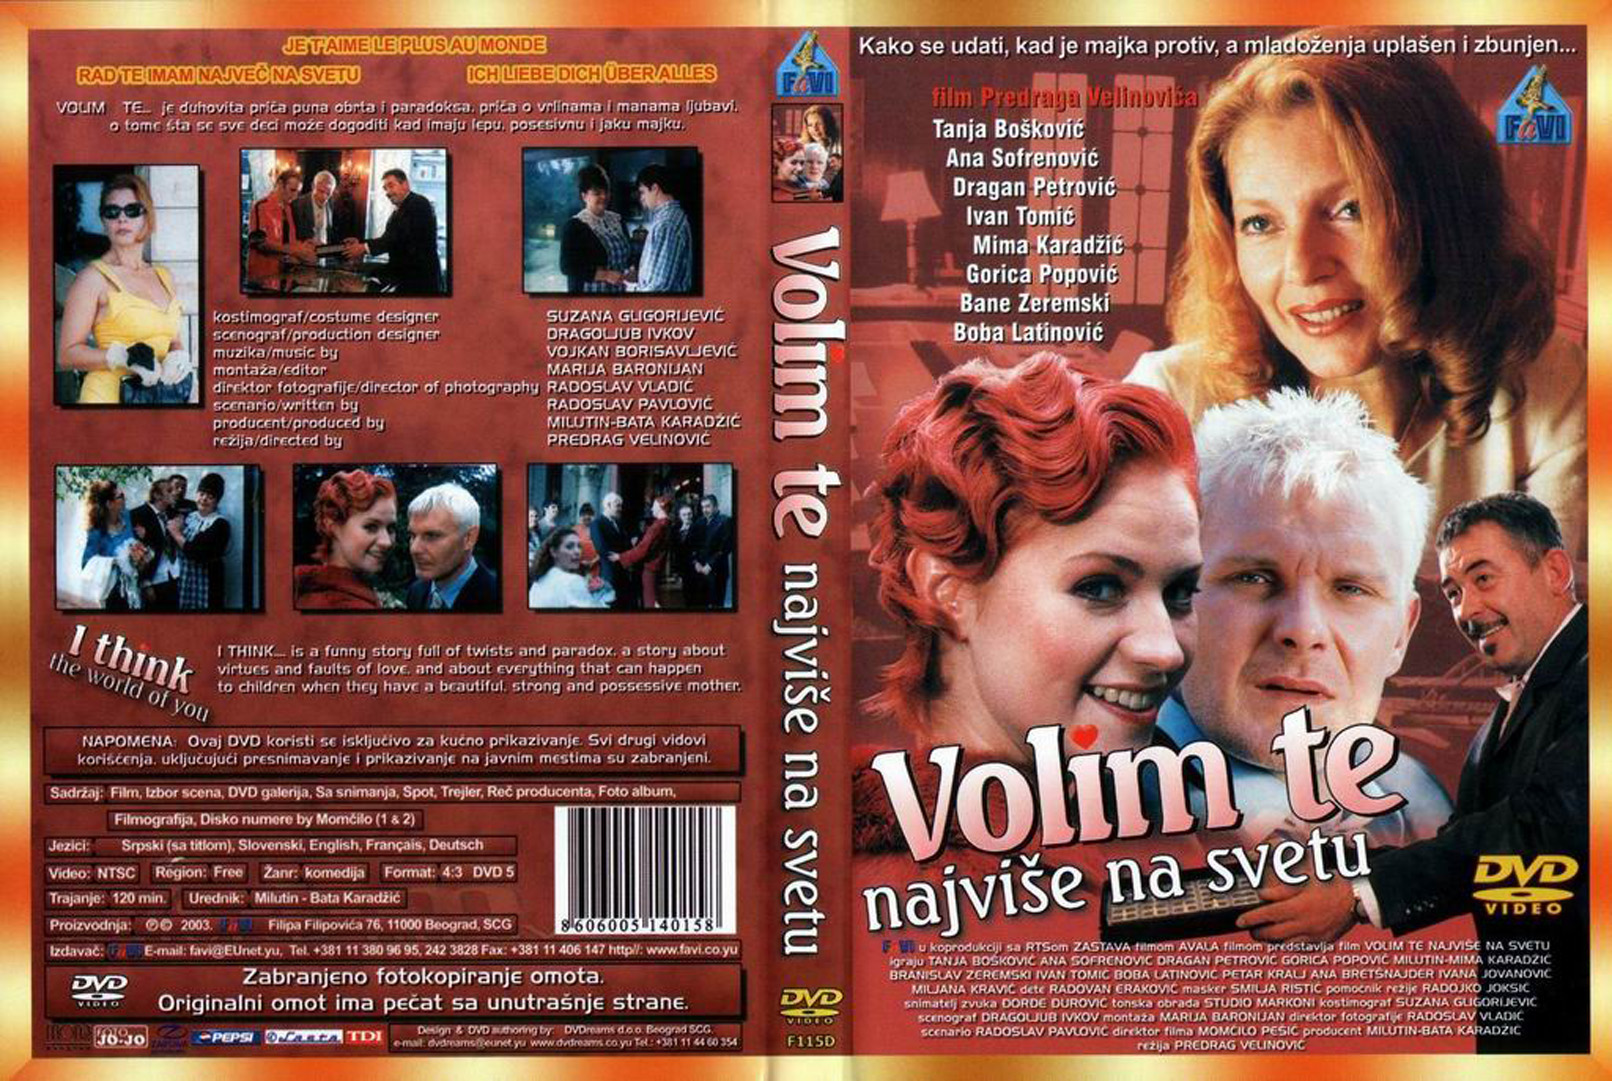 Click to view full size image -  DVD Cover - V - volim_te_najvise_na_svijetu_dvd - volim_te_najvise_na_svijetu_dvd.jpg